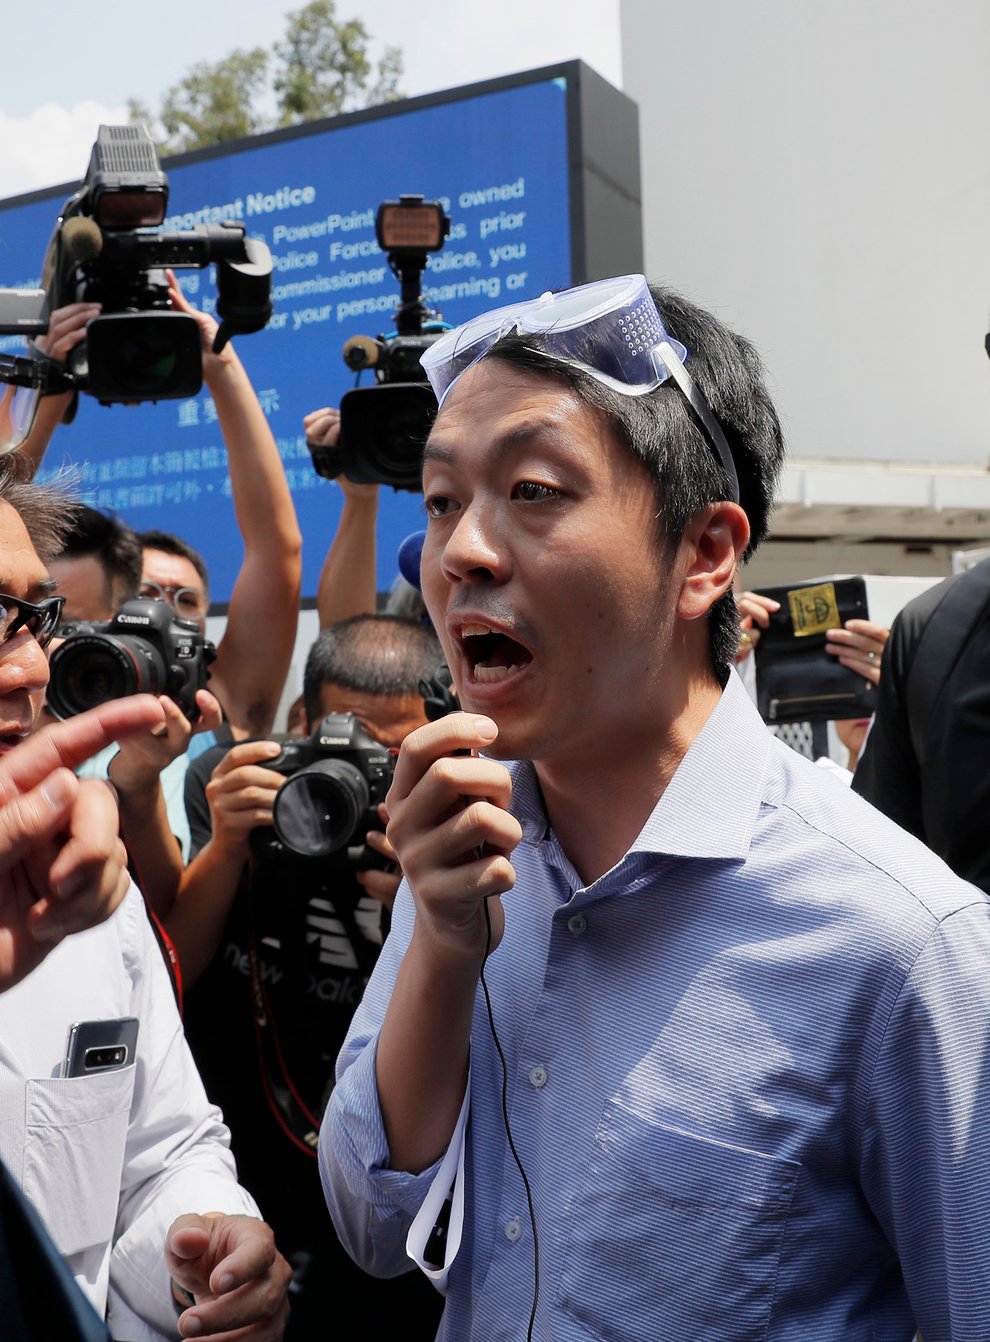 Ex-Hong Kong lawmaker plans to go into exile in Britain